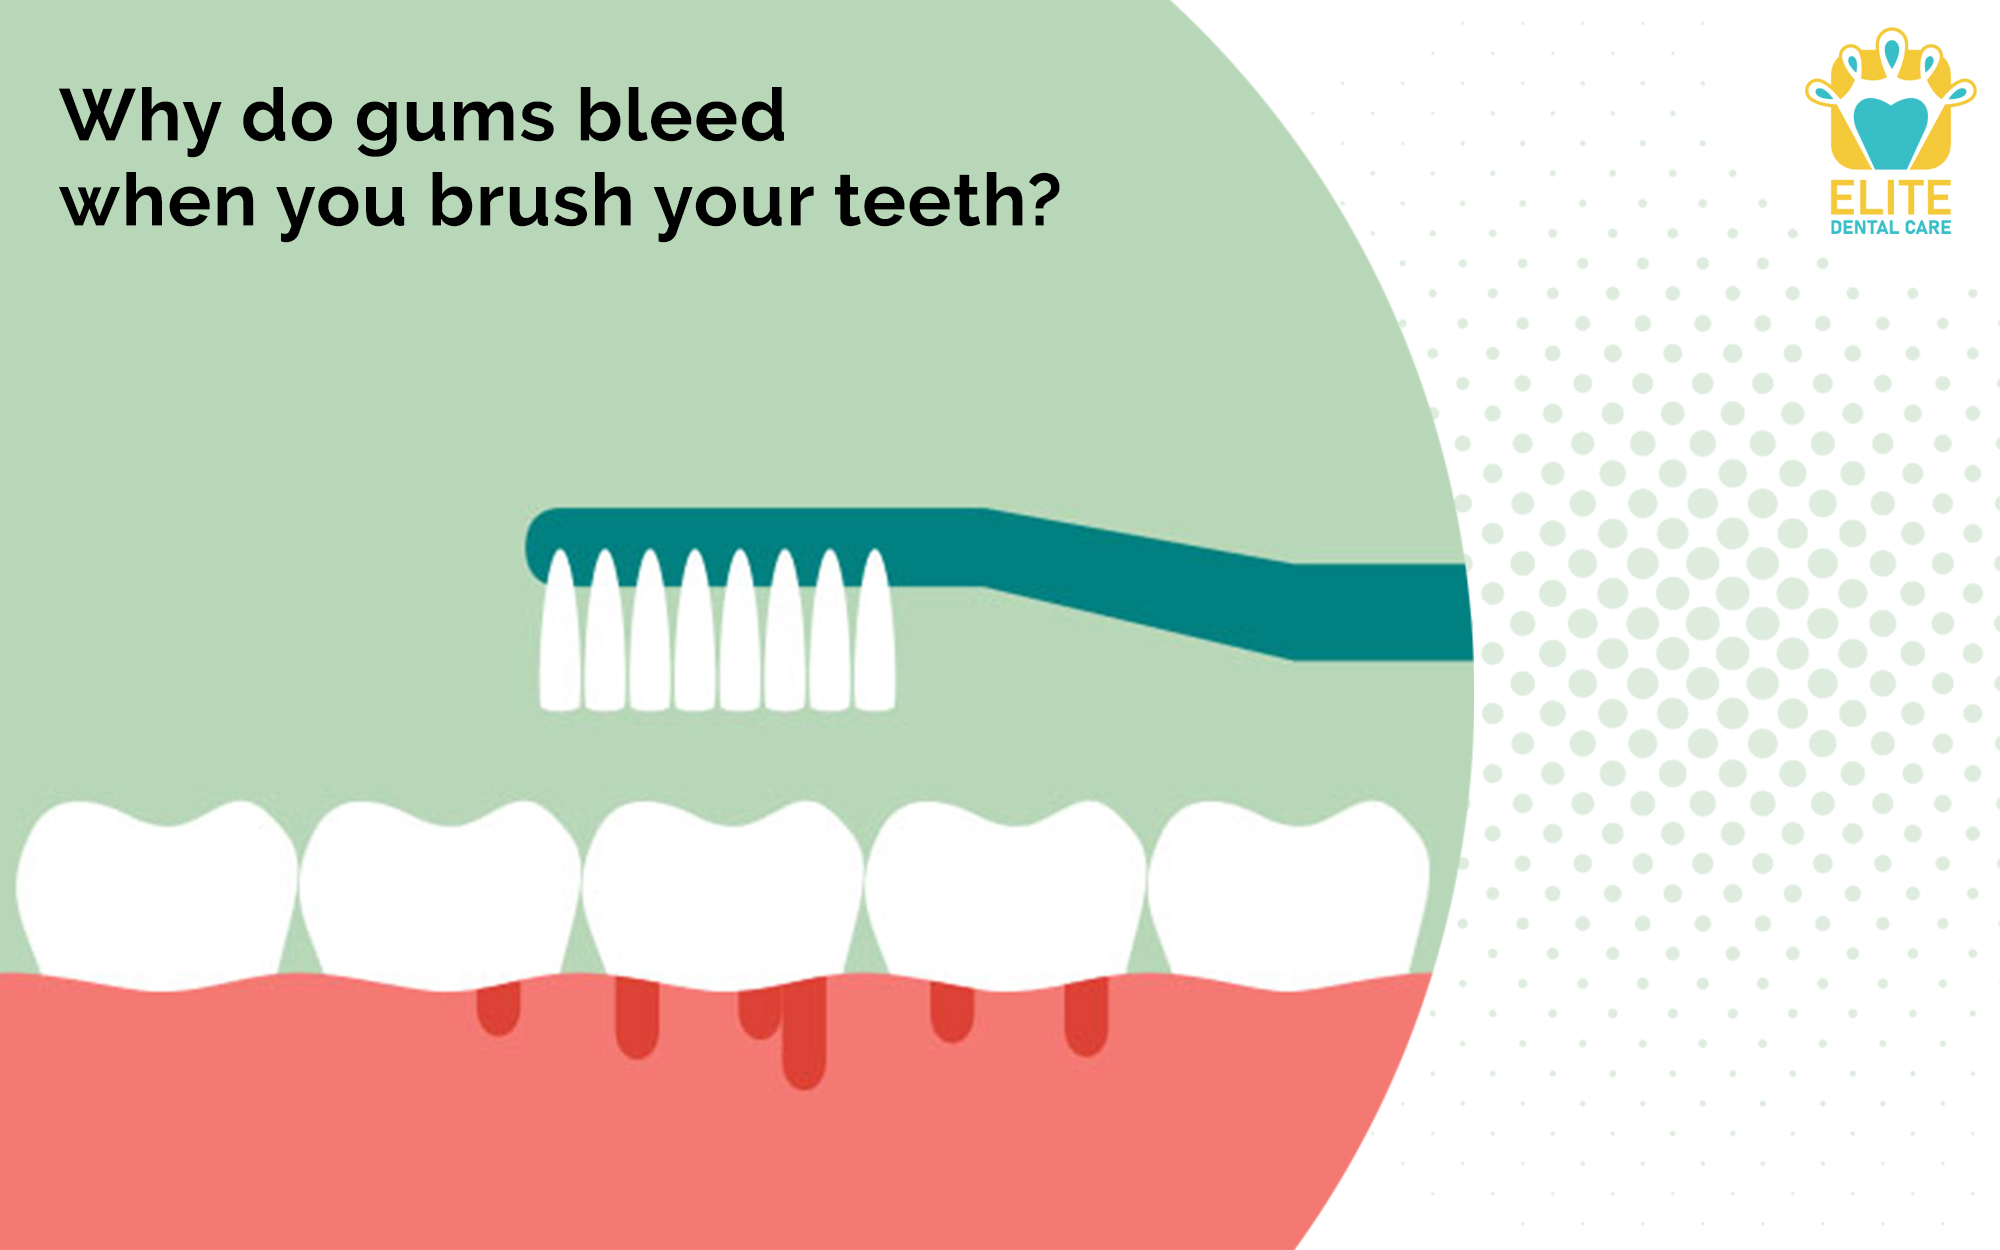 WHY DO GUMS BLEED WHEN YOU BRUSH YOUR TEETH? – ELITE DENTAL CARE TRACY